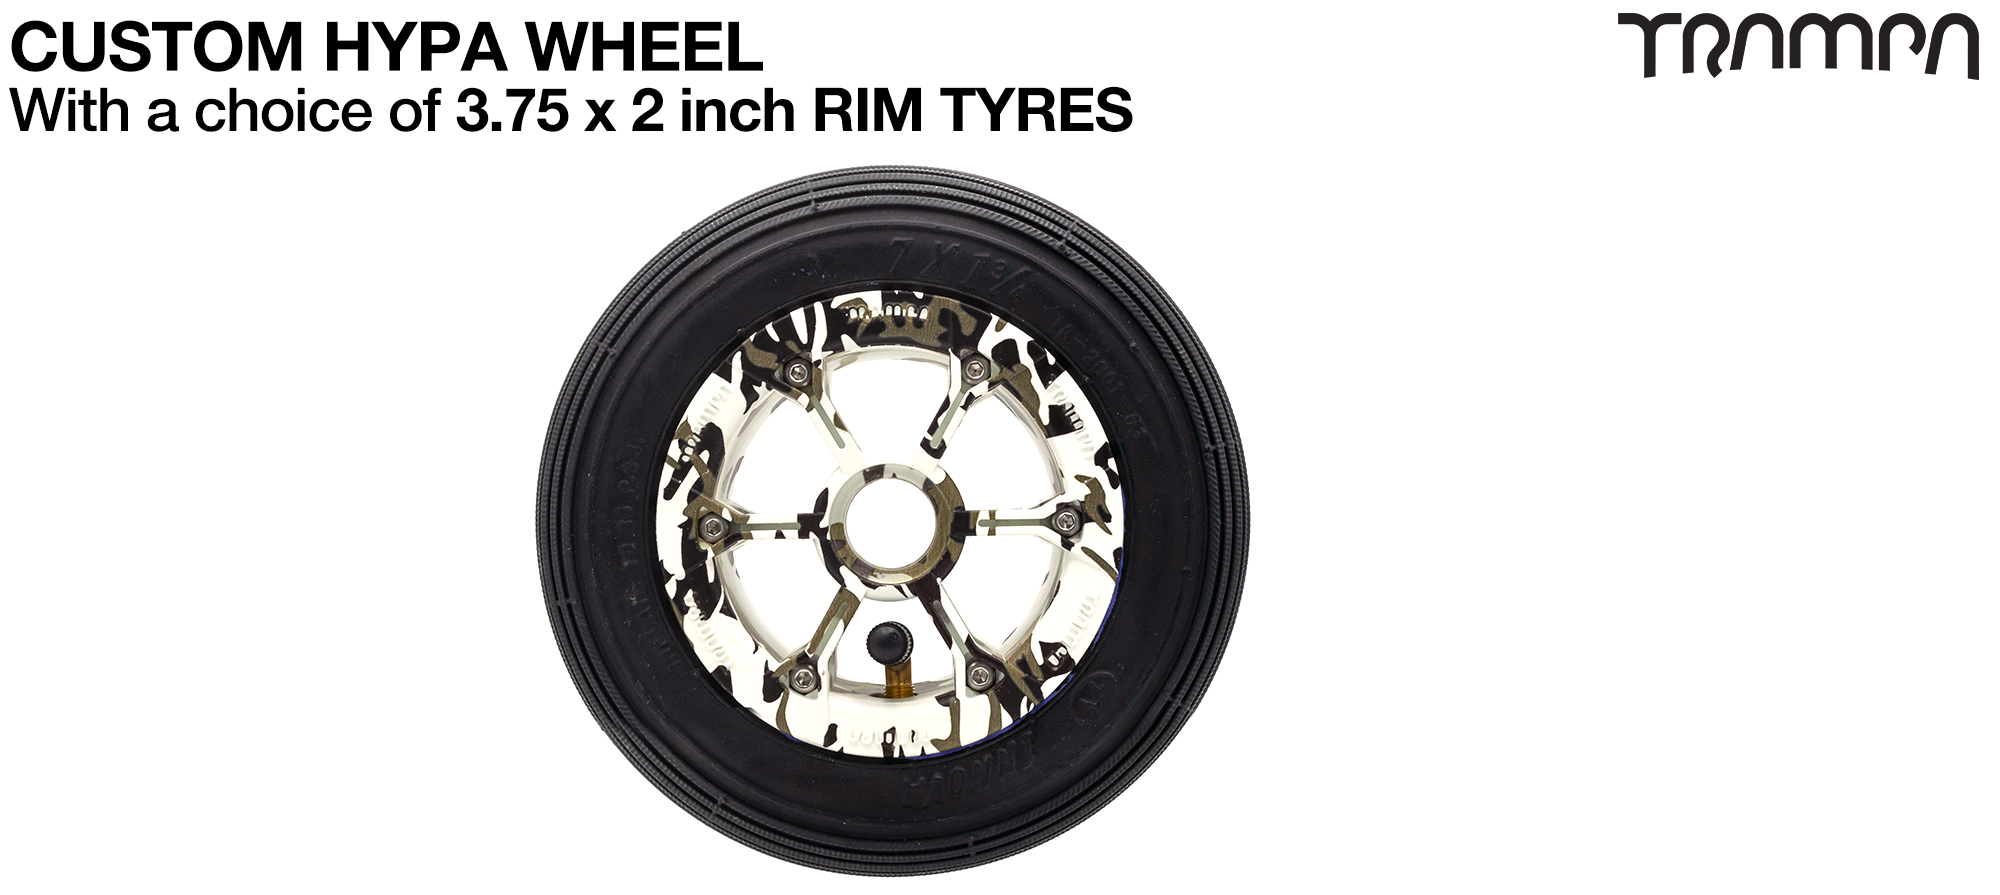 5 spoke SUPERSTAR Showing with 7 Inch INLINE Tyre